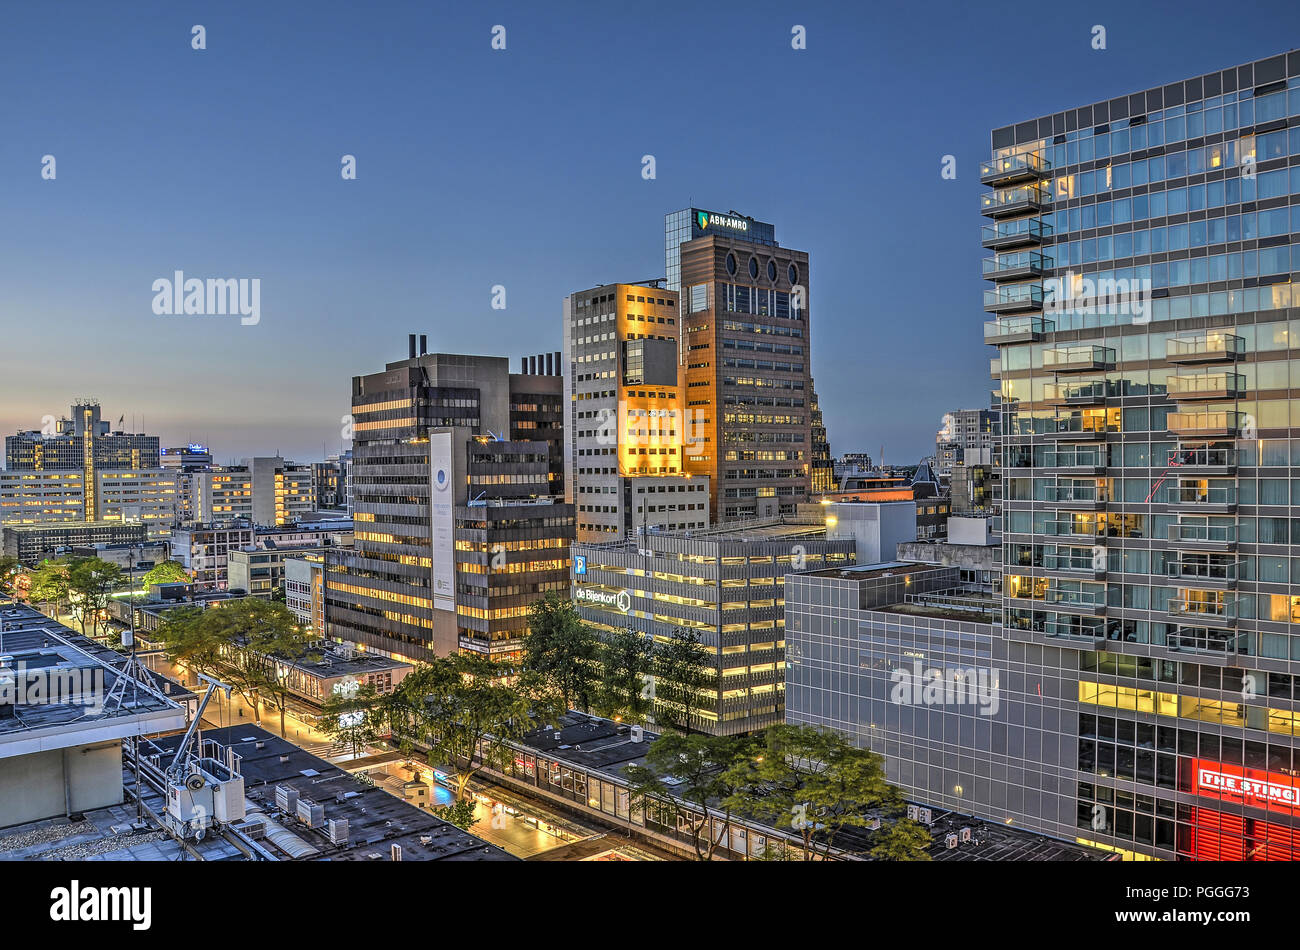 Rotterdam, The Netherlands, September 28, 2016: the Lijnbaan area, with it's pedestrian shopping street surrounded by modern highrise, during the blue Stock Photo